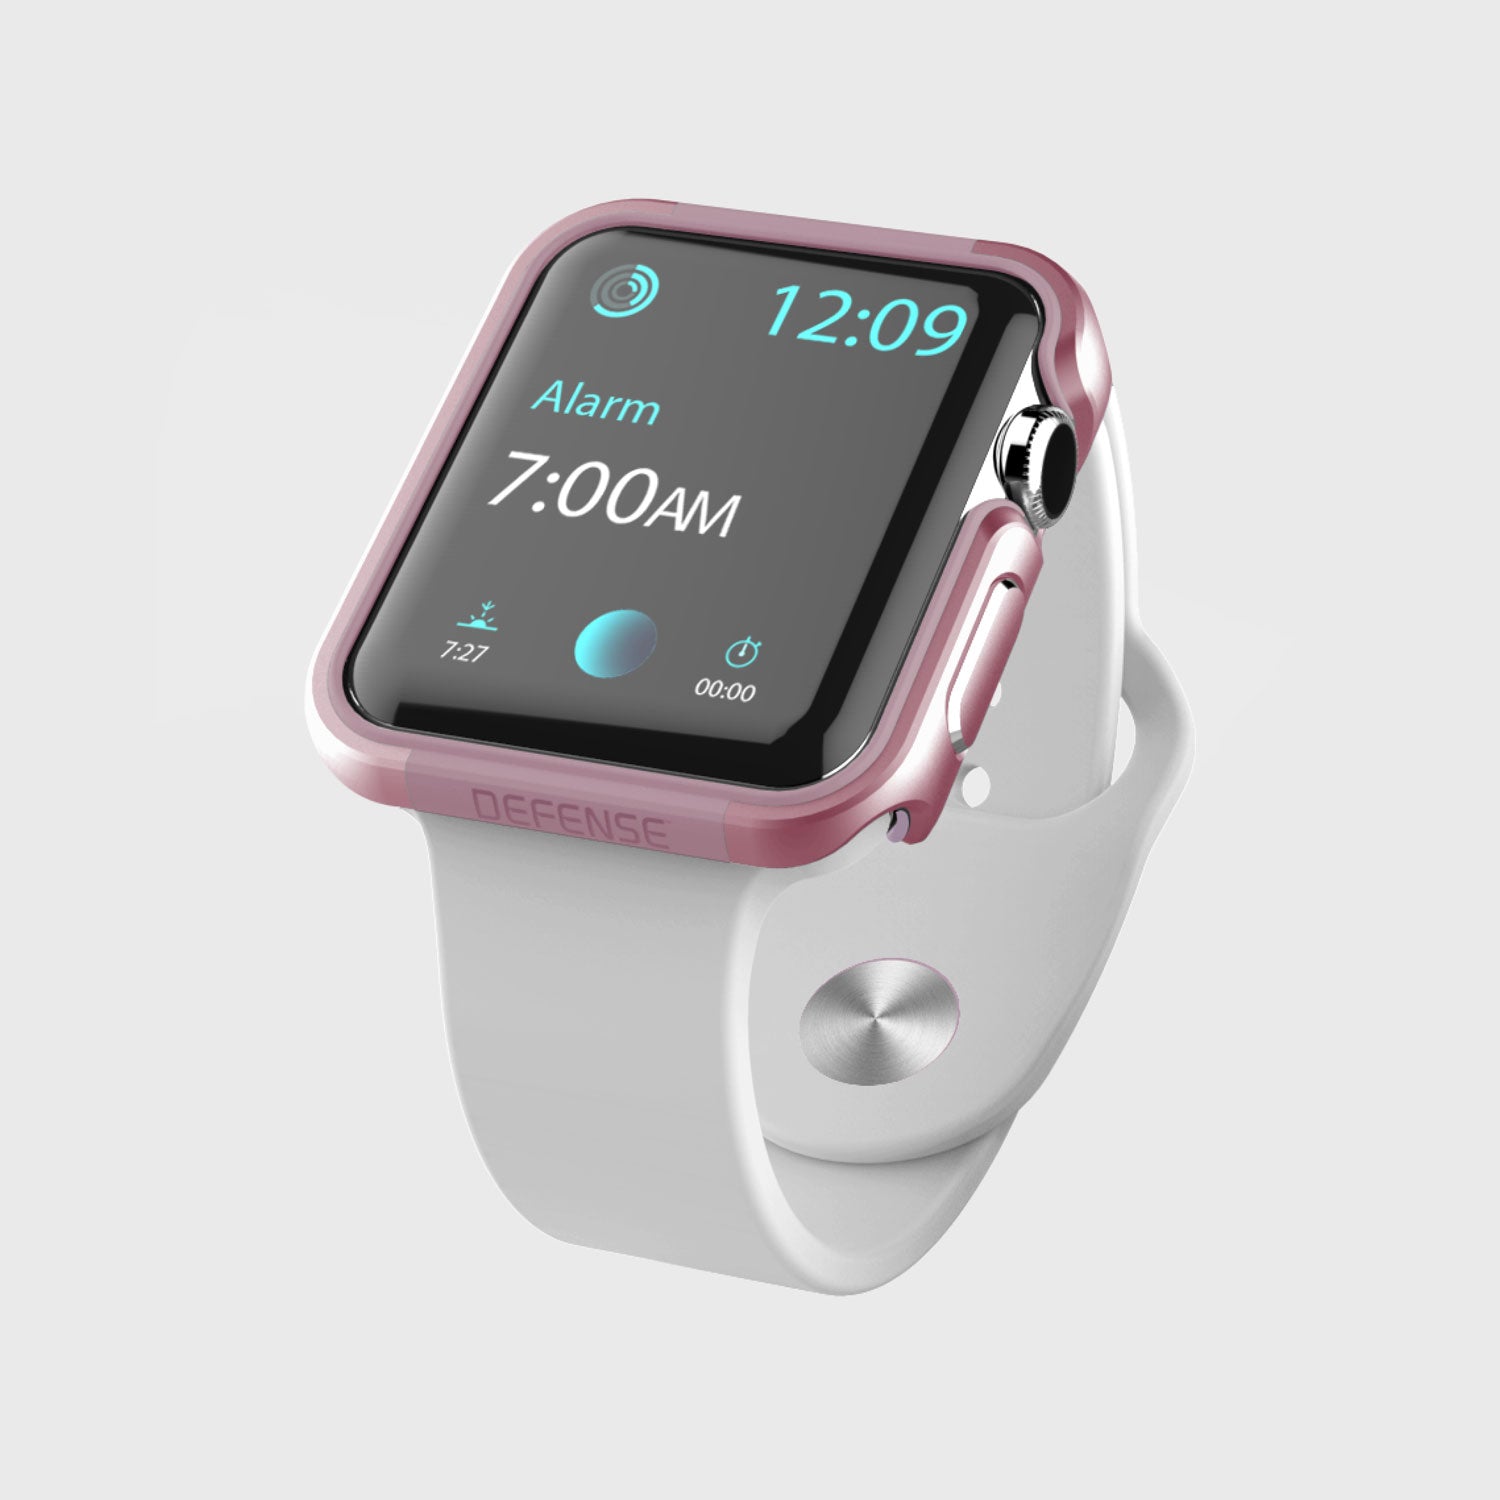 A pink Raptic Apple Watch 44mm Case - EDGE with a premium machined anodized aluminum bumper that protects it, on a white background.